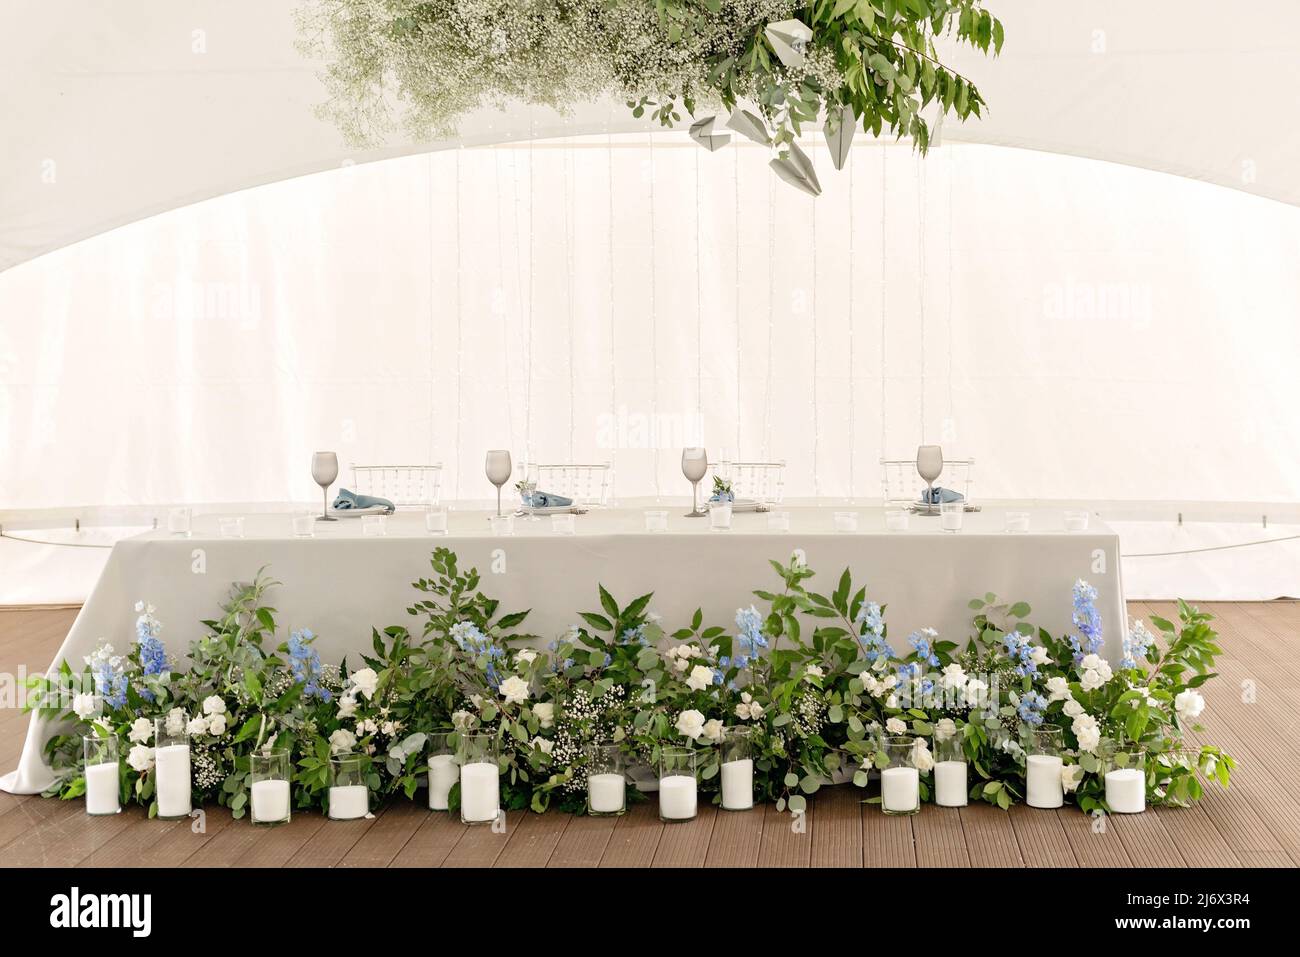 Wedding presidium in restaurant. Banquet table for newlyweds with flowers, greenery, candles and garland ligths. Lush floral arrangement. Luxury weddi Stock Photo